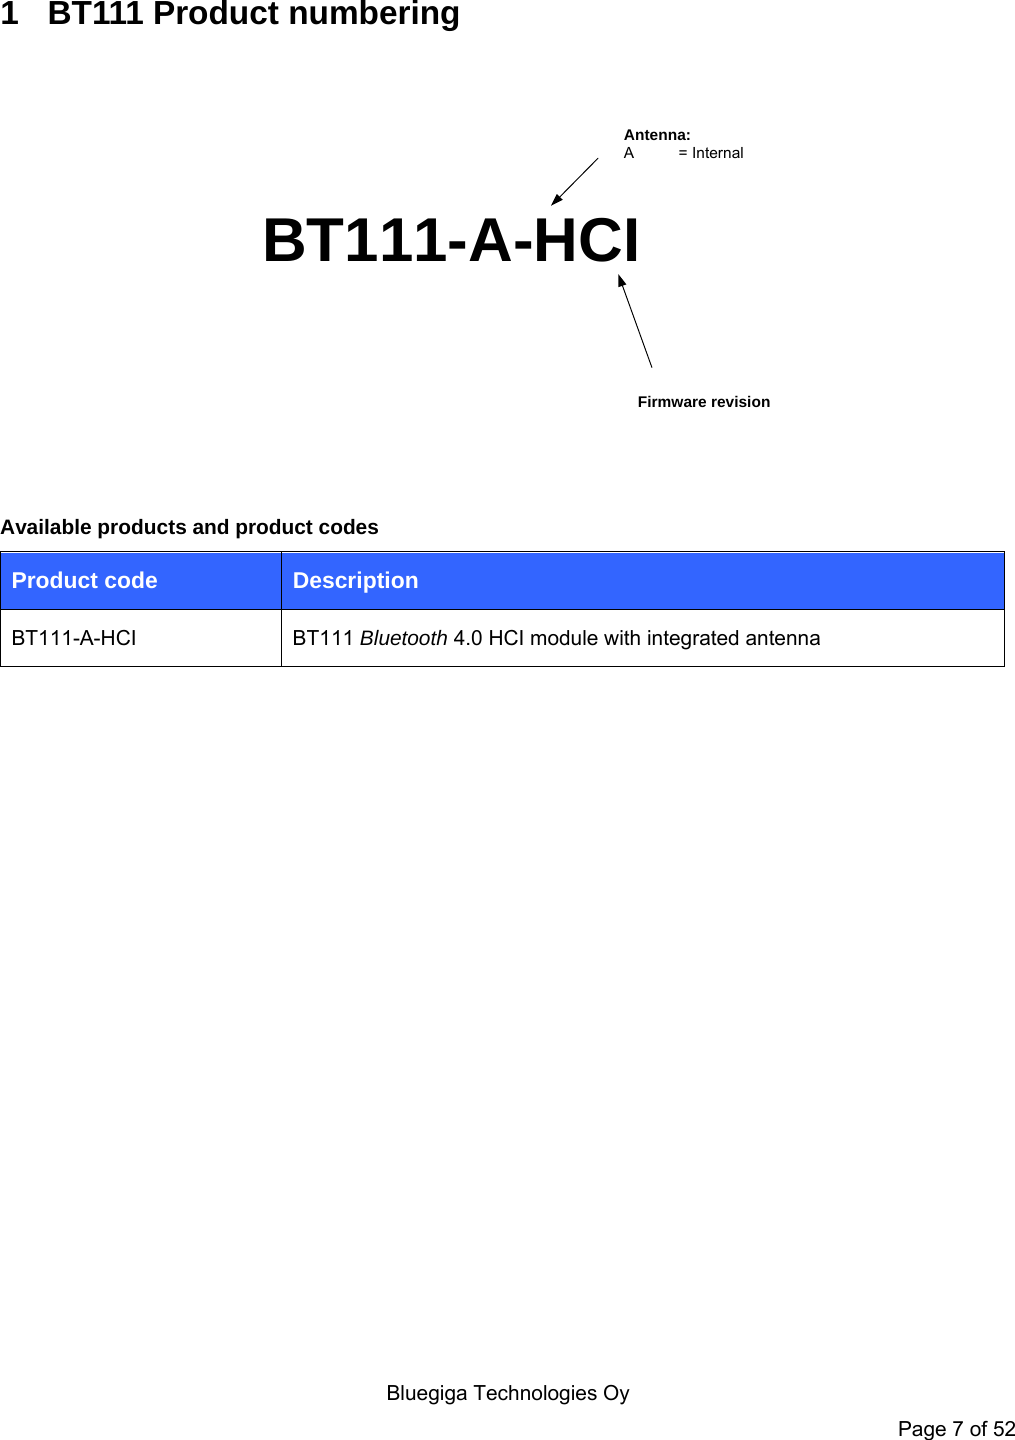    Bluegiga Technologies Oy Page 7 of 52 1  BT111 Product numbering BT111-A-HCI             Firmware revisionAntenna:A = Internal Available products and product codes Product code  Description BT111-A-HCI BT111 Bluetooth 4.0 HCI module with integrated antenna   